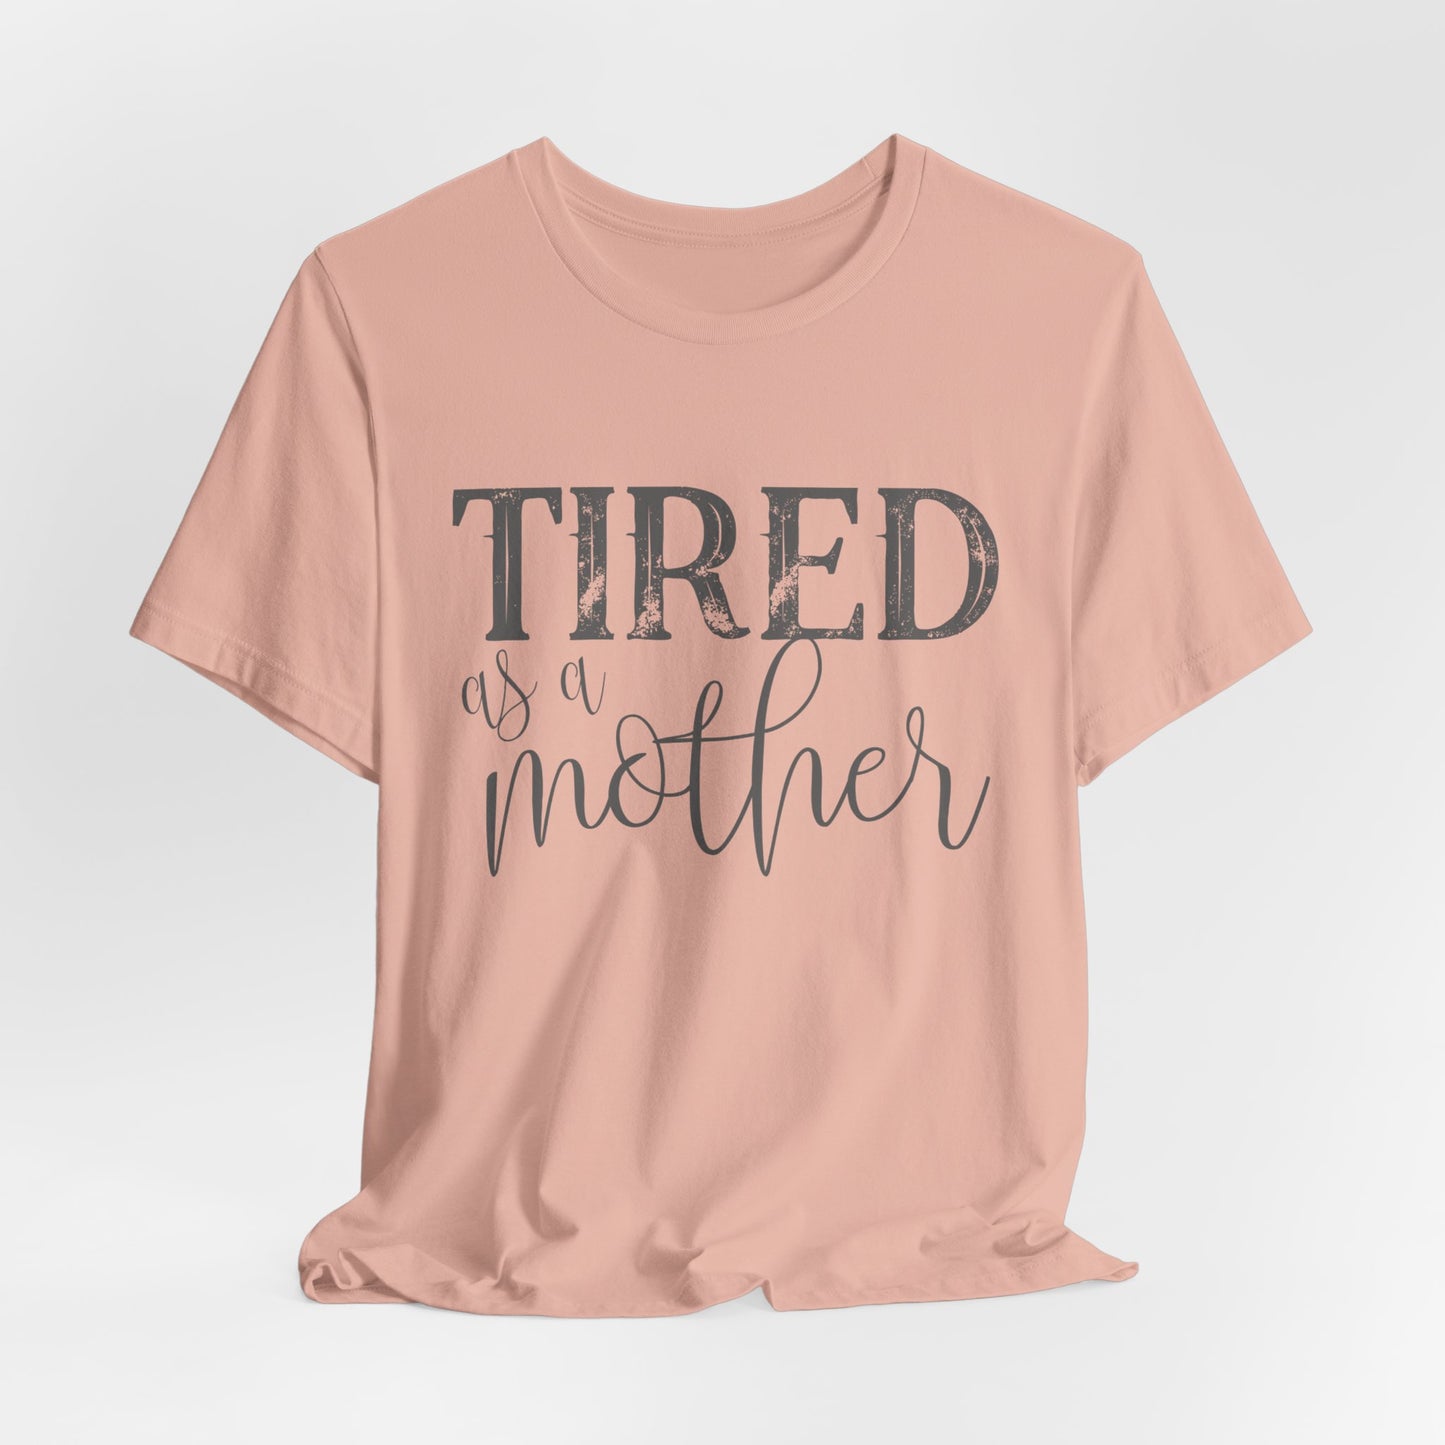 Tired as a Mother Funny Women's Short Sleeve Tee